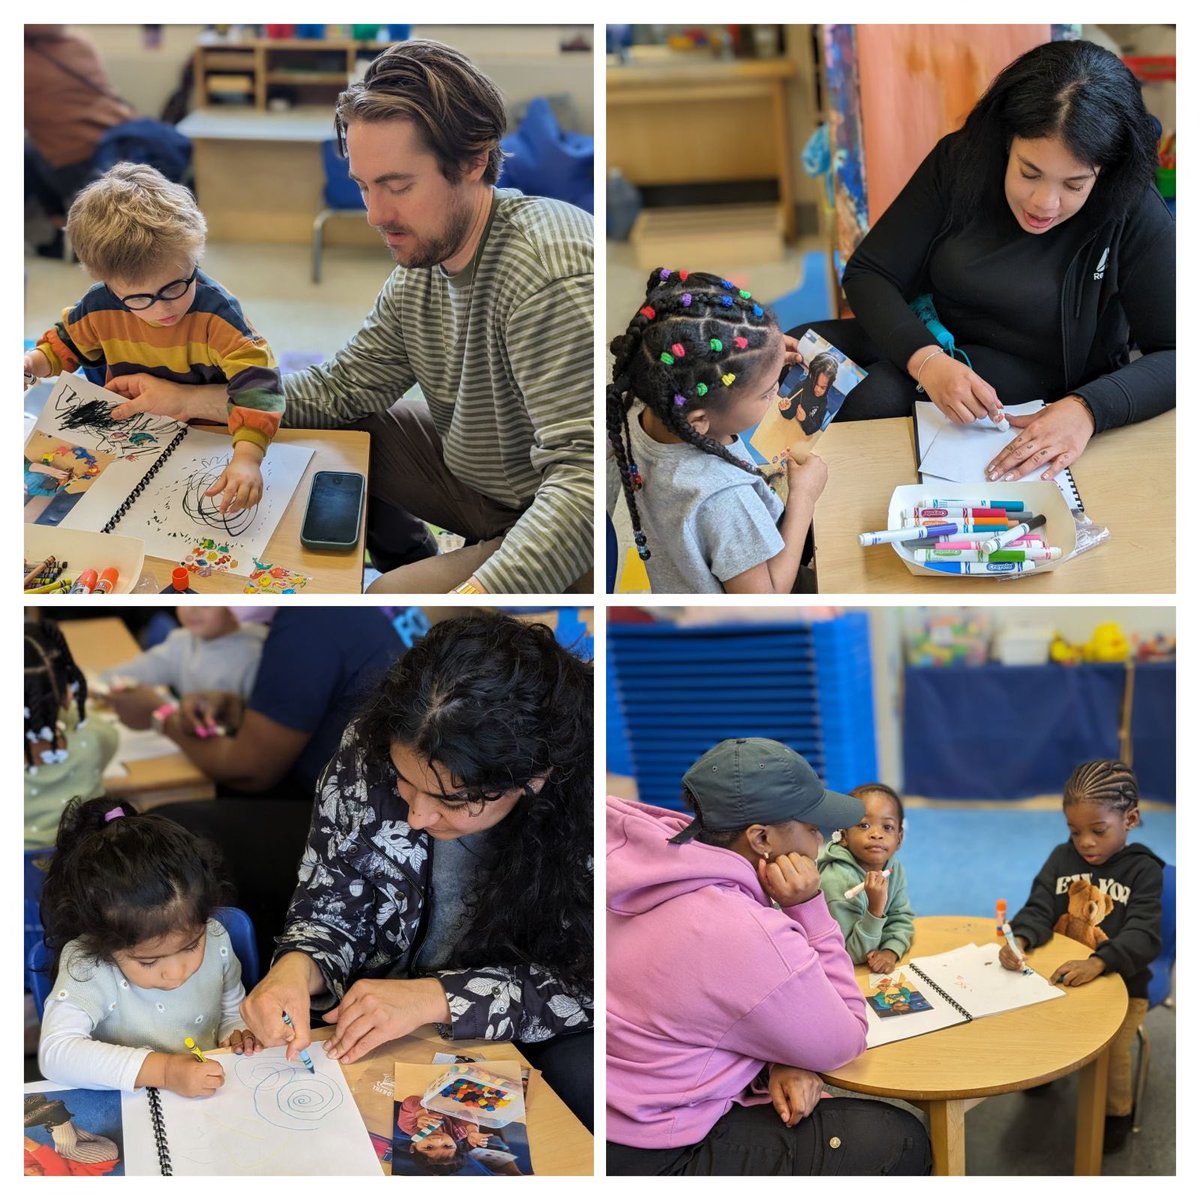 A special time on “Family Day” was shared by Joan Snow/Glenwood 3K students and their families by celebrating and creating their very own personal books. #Reimaginelearning @Rosaliefav @District22BKNY @DOEChancellor @NYCSchools @Stu_chasabenis @NYCCouncil